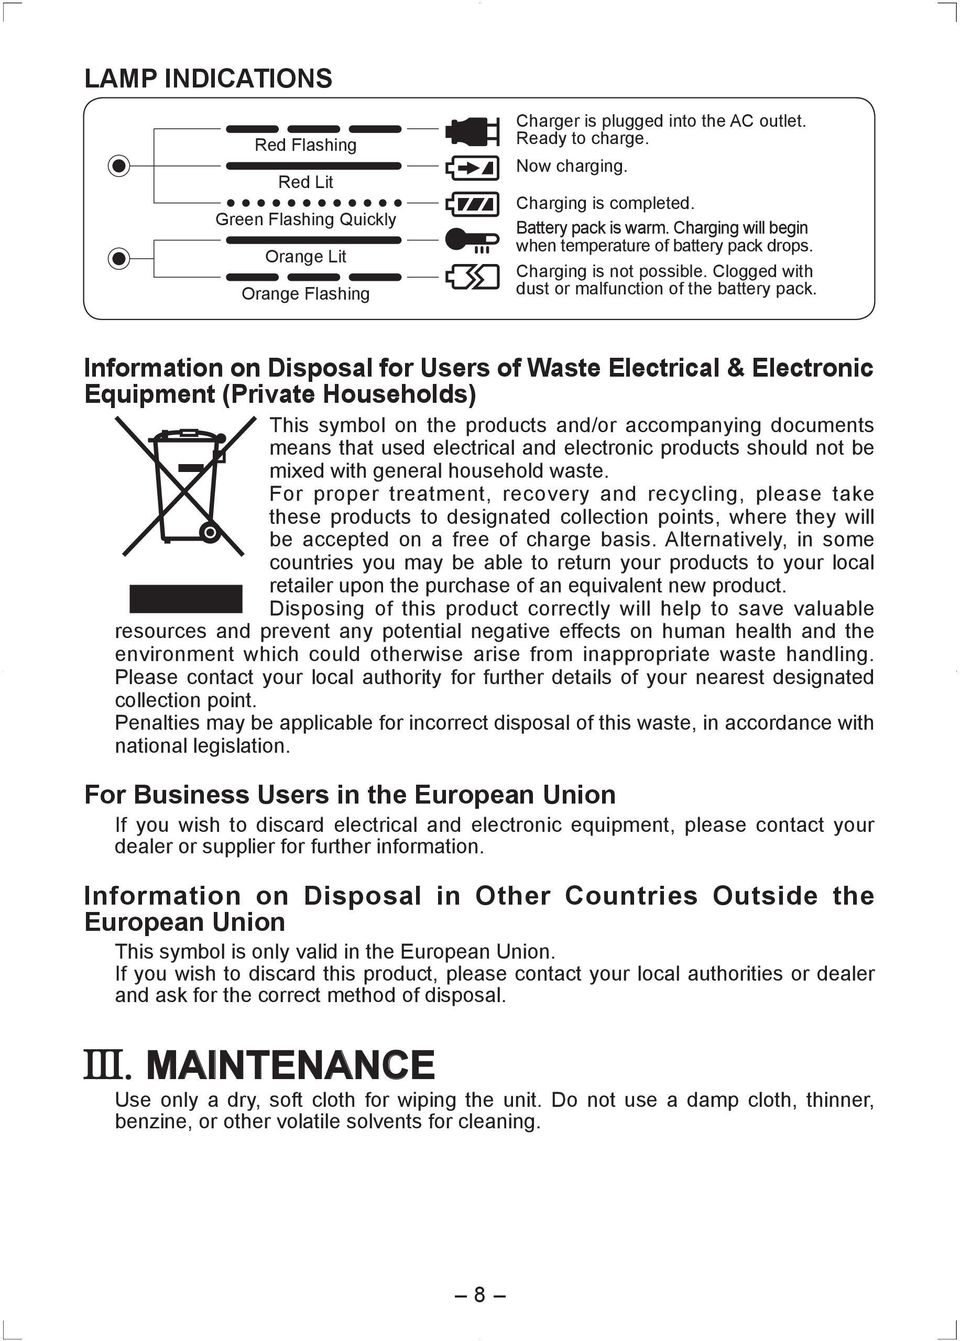 Information on Disposal for Users of Waste Electrical & Electronic Equipment (Private Households) This symbol on the products and/or accompanying documents means that used electrical and electronic